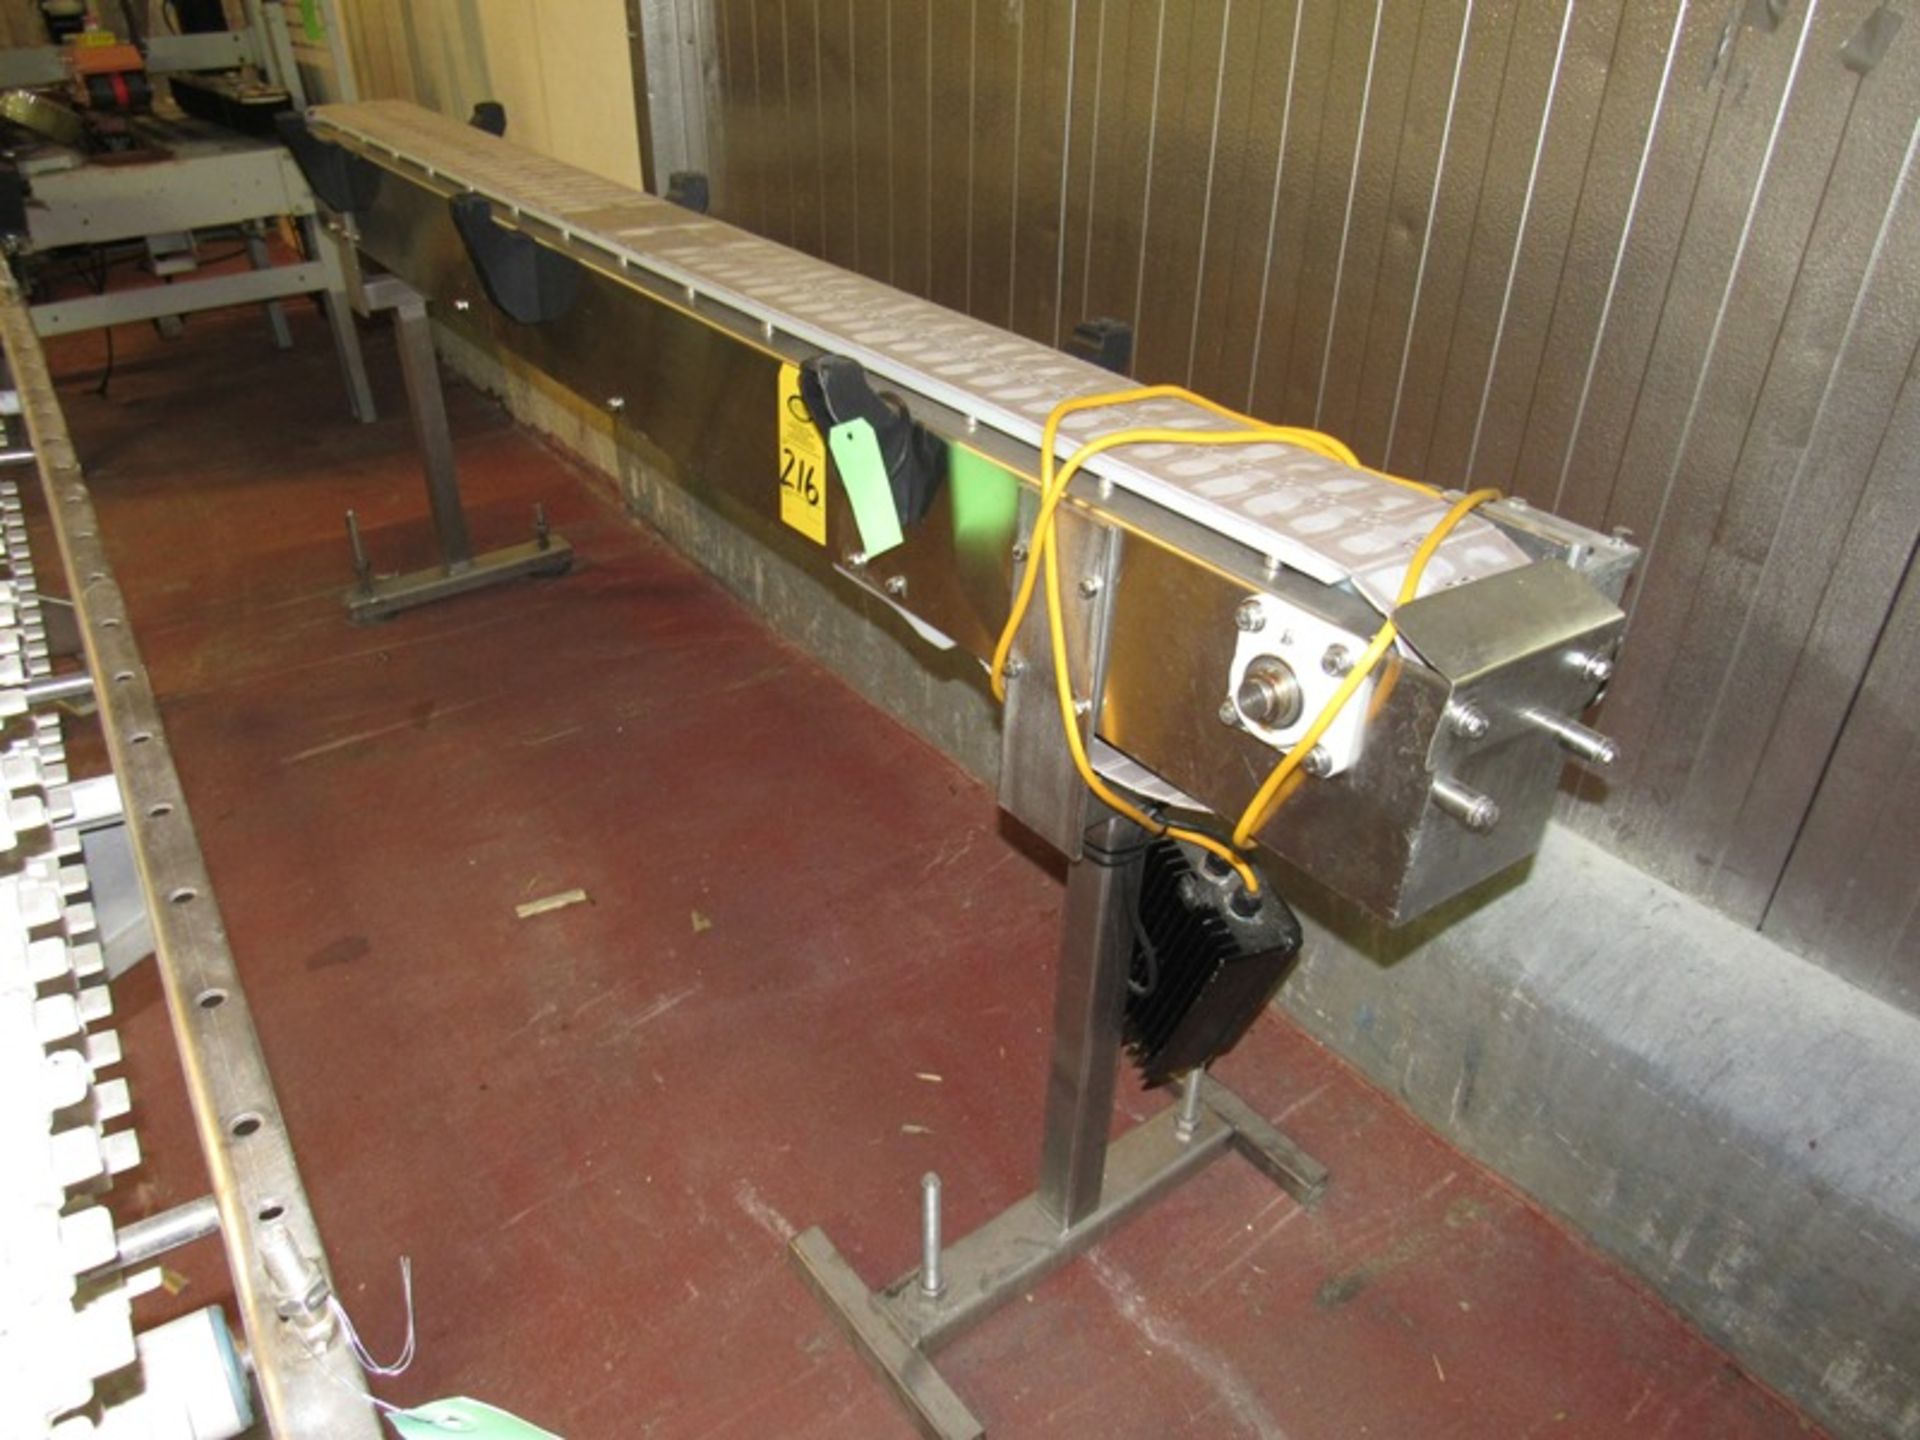 Conveyor 6" W X 8' L plastic belt, 230 volts, variable drive ($35.00 Required Loading Fee- Rigger: